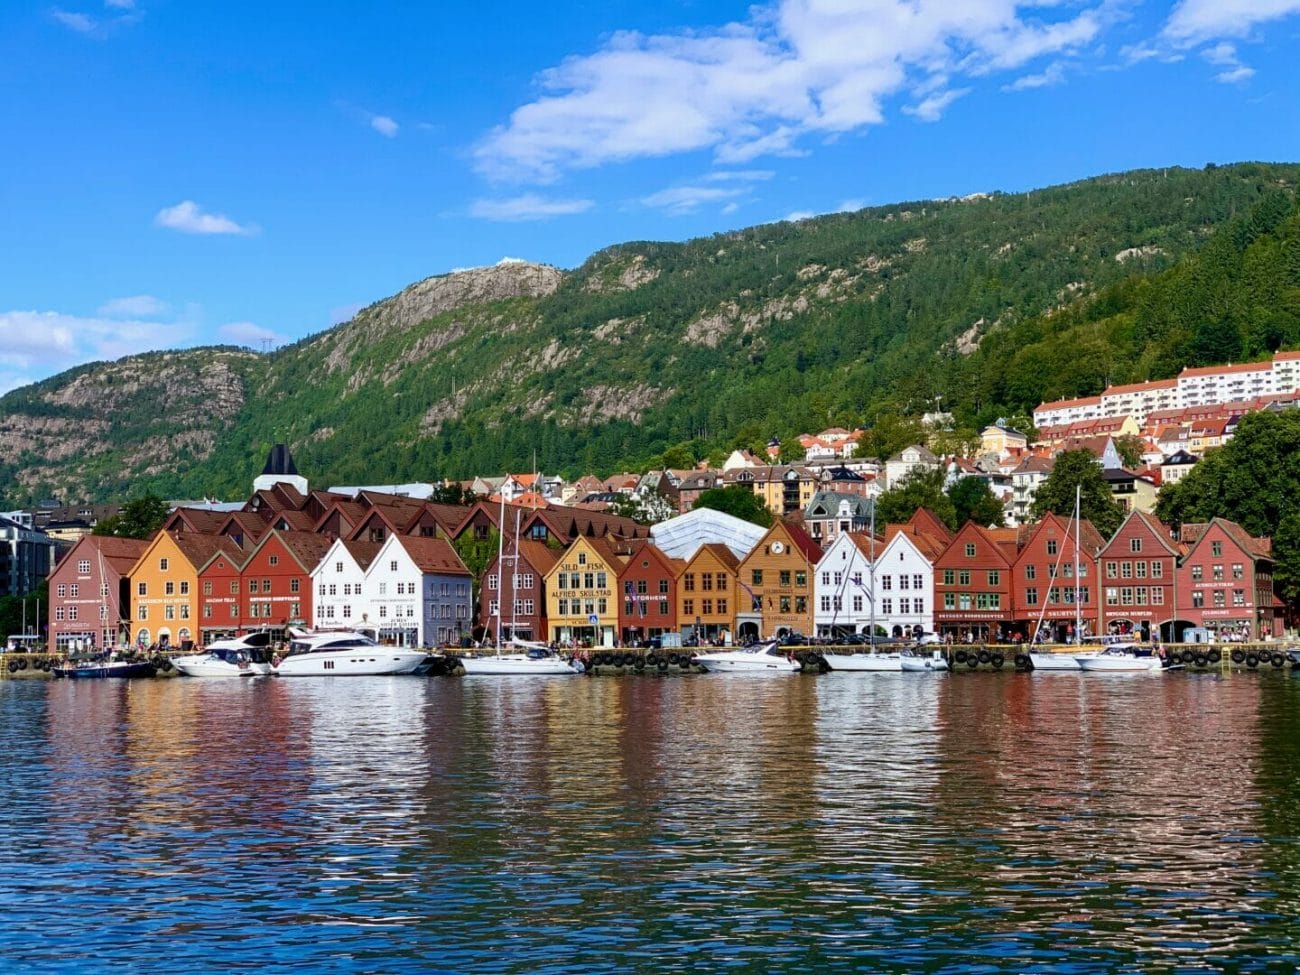 houses near body of water under blue sky during daytime - Best Places to visit in Europe in December